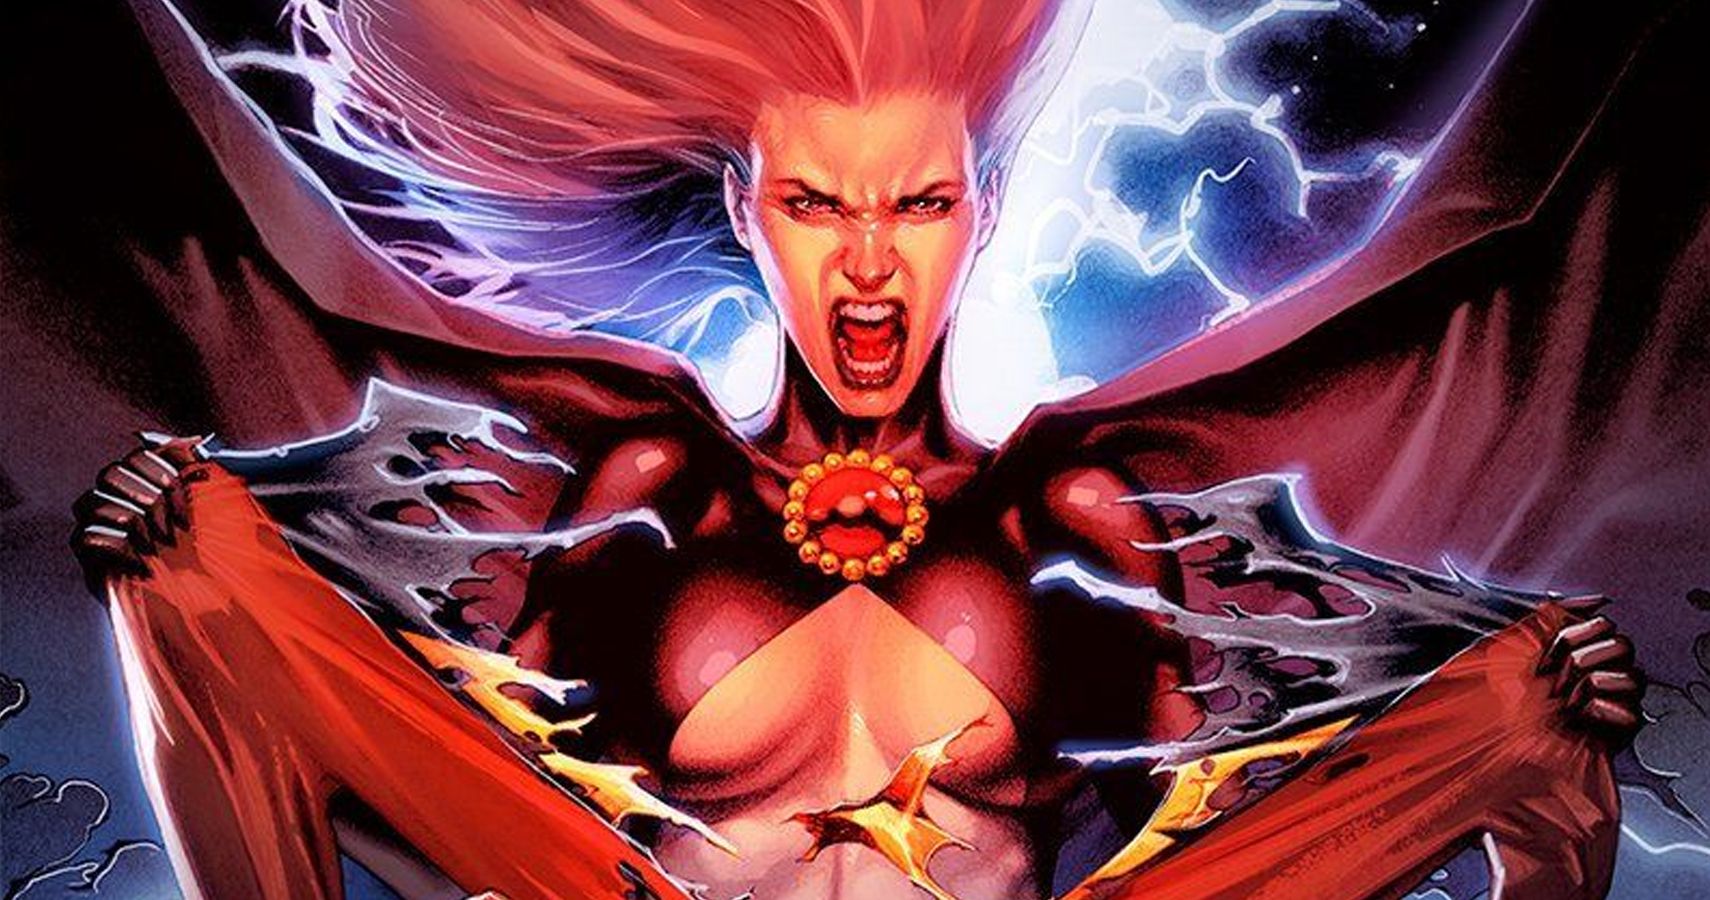 Madelyne Pryor reveal herself as the Goblin Queen in Marvel Comics